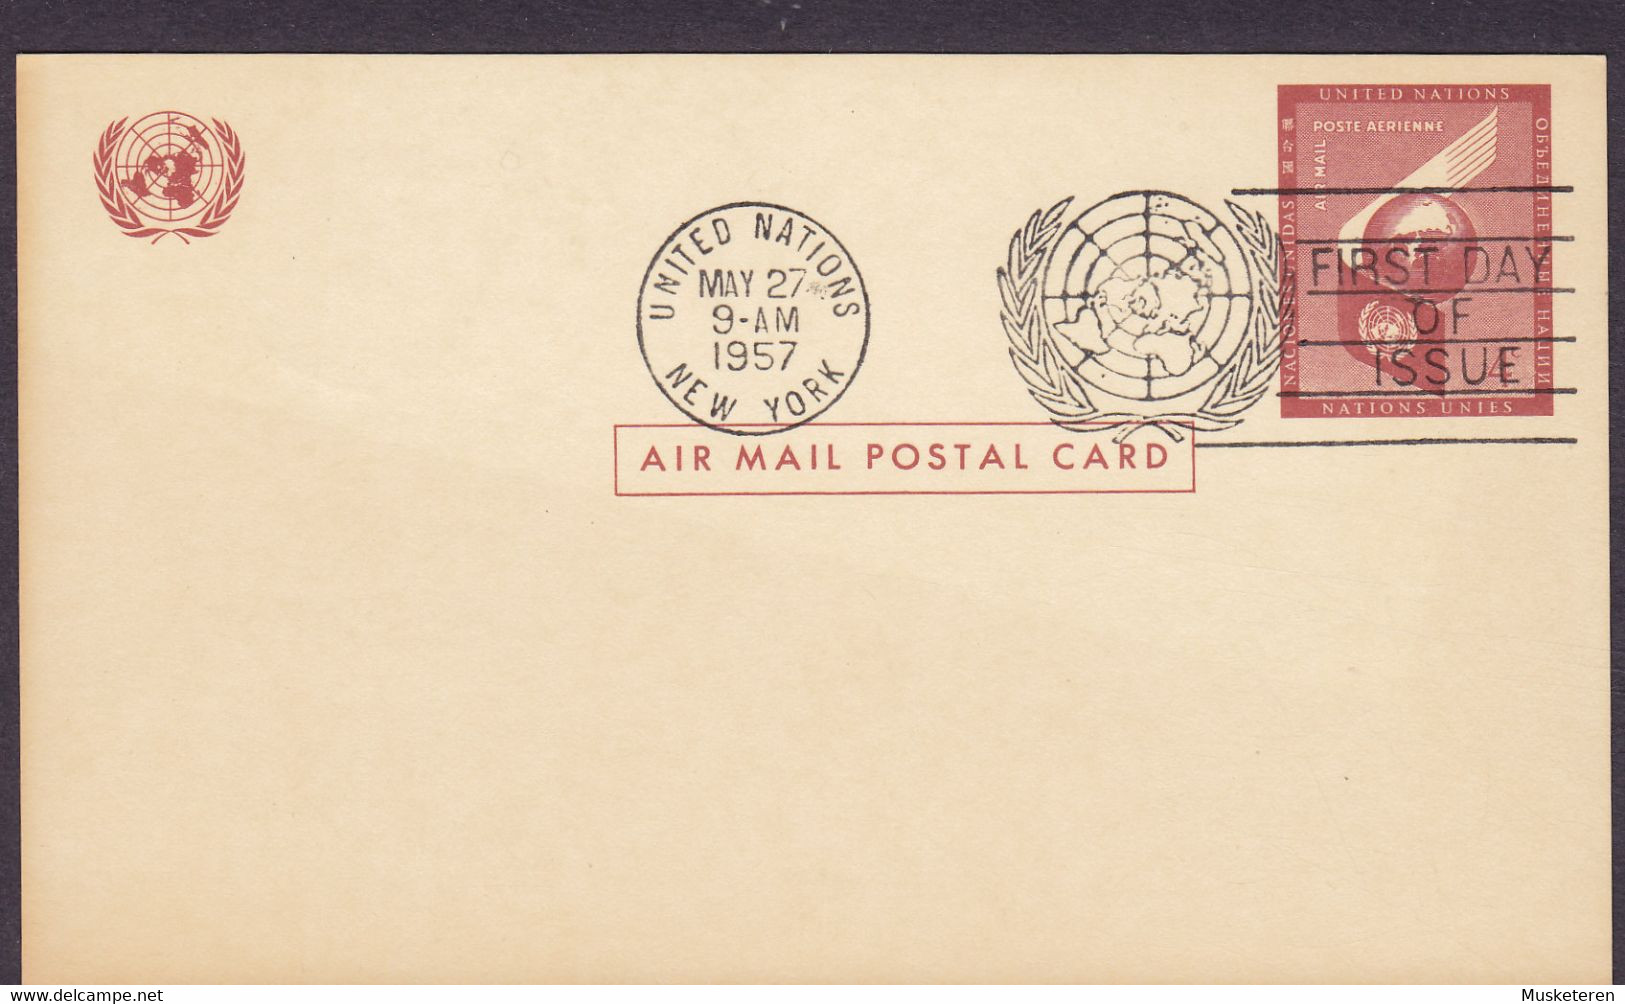 United Nations Postal Stationery Ganzsache Entier NEW YORK First Day Of Issue 1957 Air Mail Postal Card - Brieven En Documenten